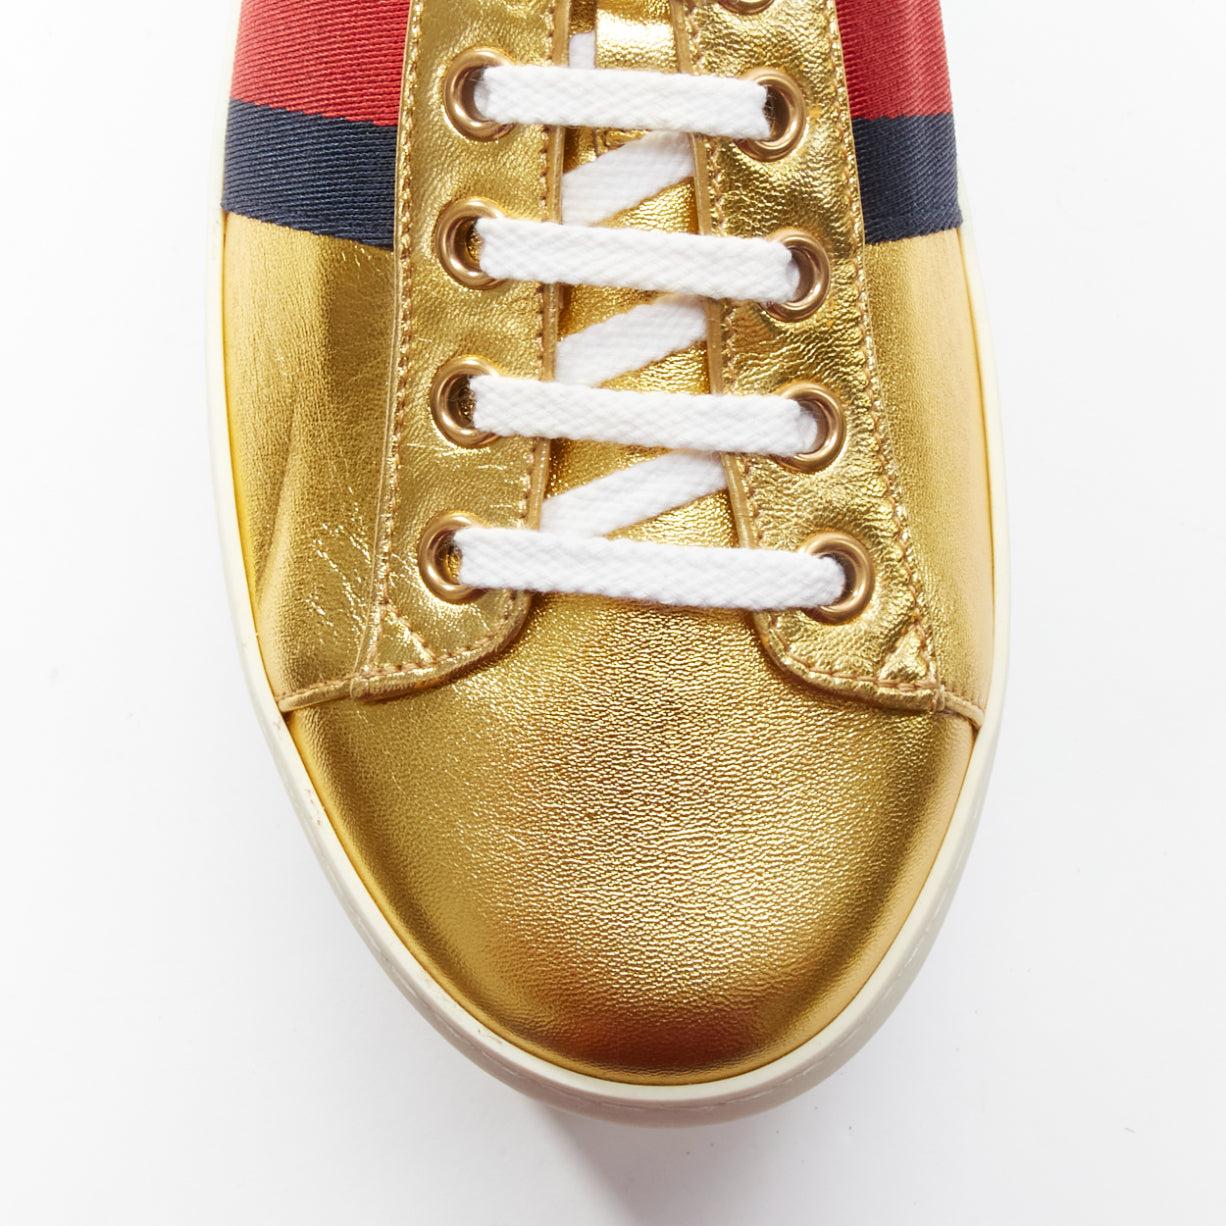 GUCCI Alessandro Michele Peggy rainbow gold web platform sneakers EU37.5 For Sale 1